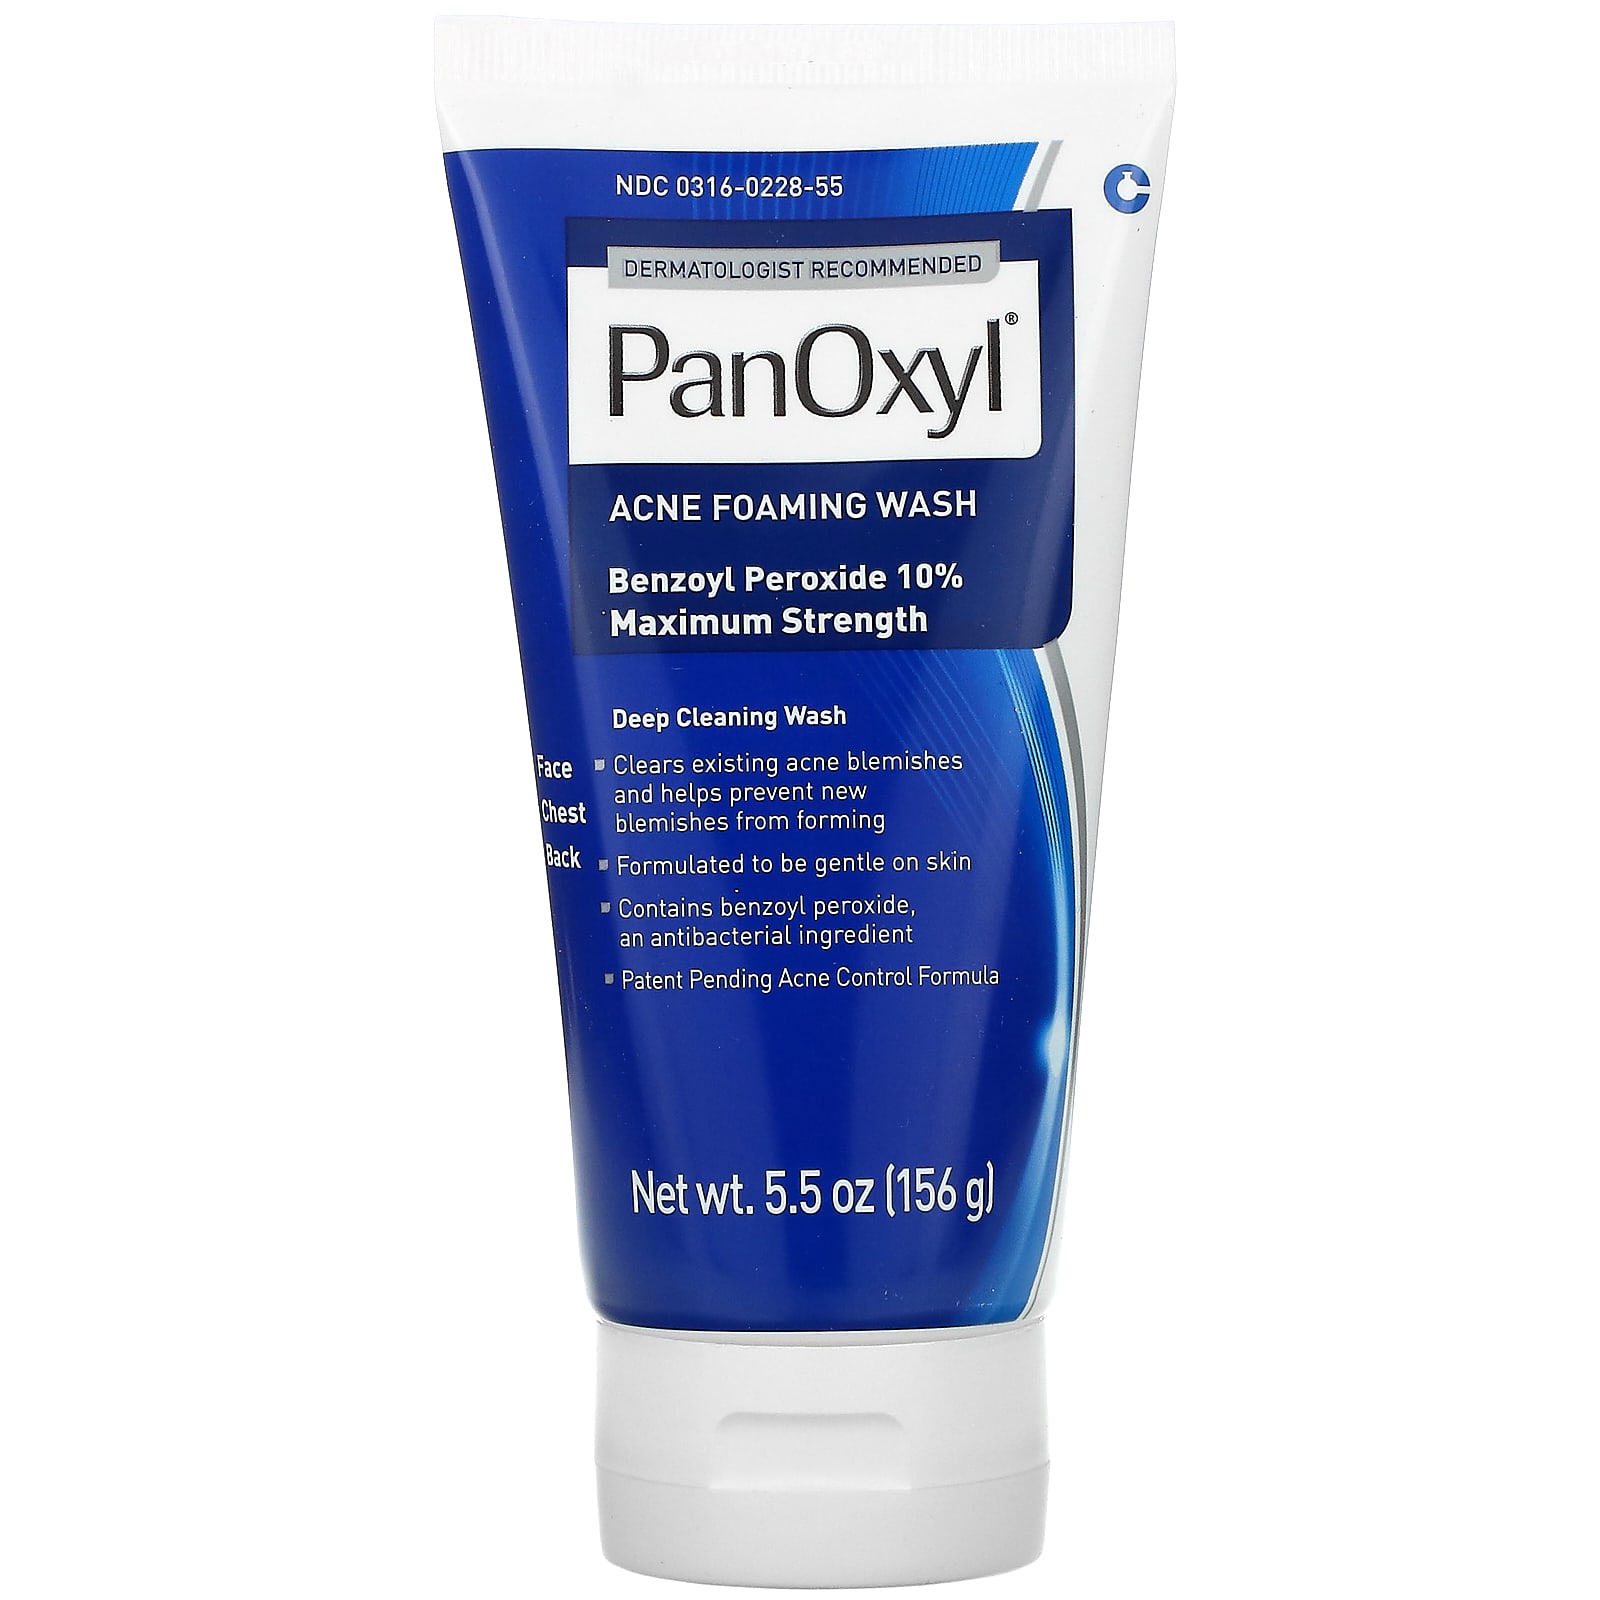 PanOxyl Acne Foaming Wash with Benzoyl Peroxide 10% Maximum Strength